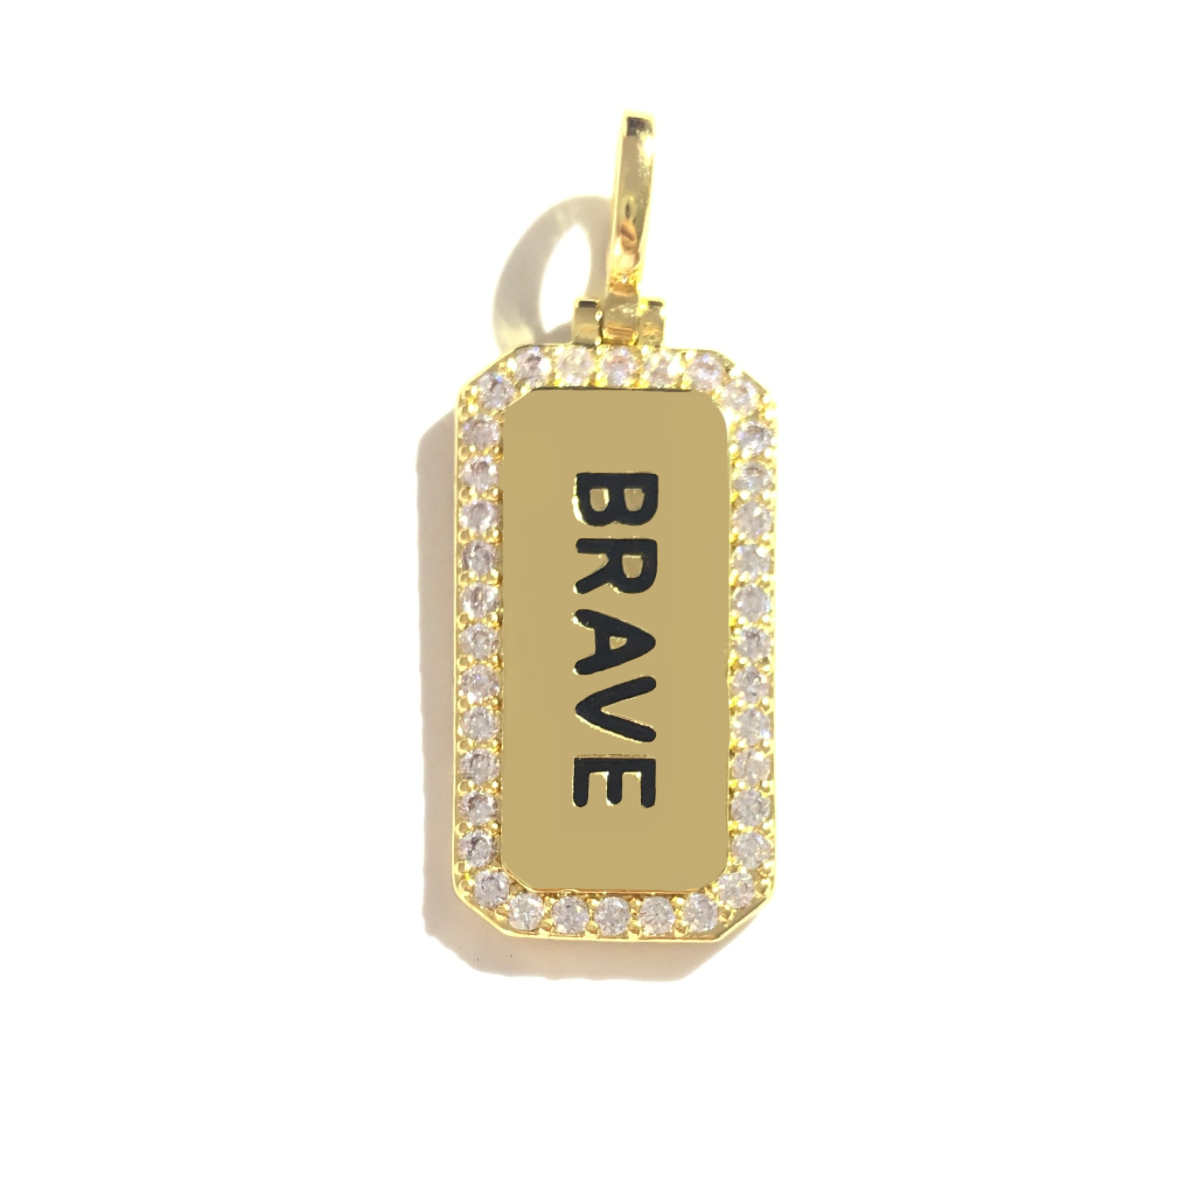 10pcs/lot 38*15mm CZ Paved Brave Word Tags Charms Pendants Gold CZ Paved Charms Christian Quotes New Charms Arrivals Word Tags Charms Beads Beyond